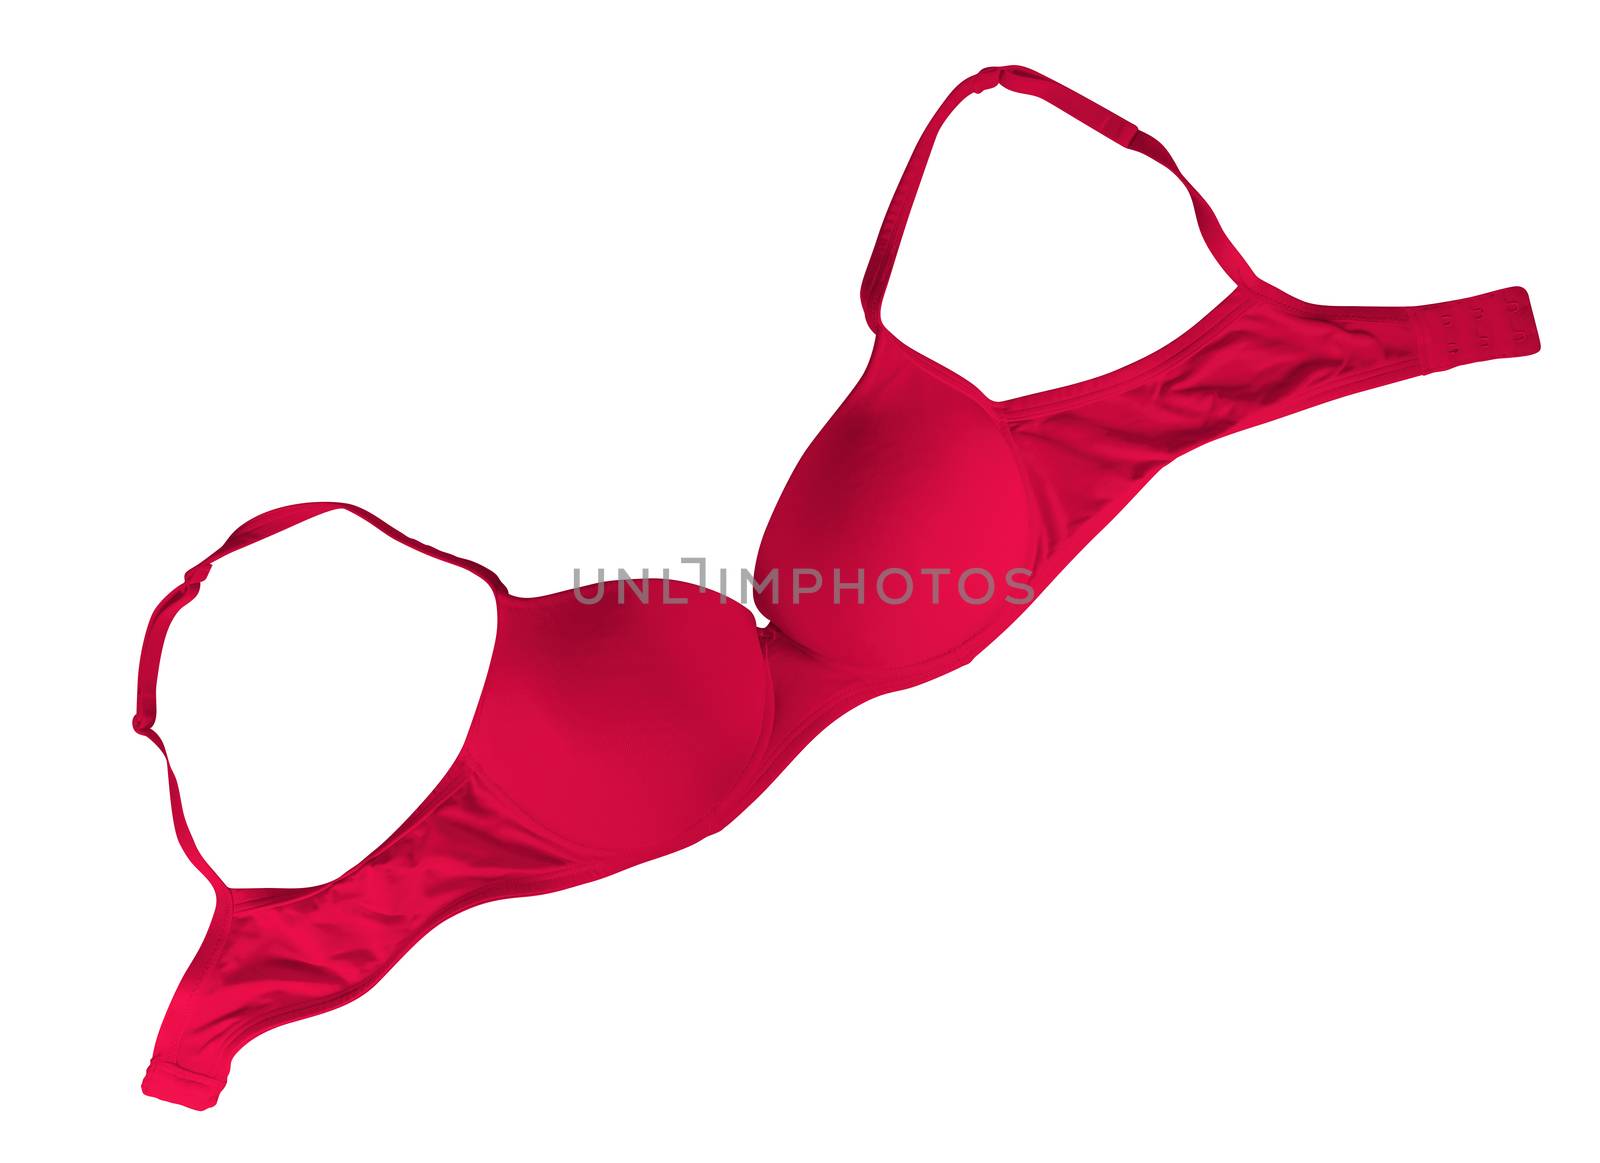 Brassiere isolated - Red by Venakr